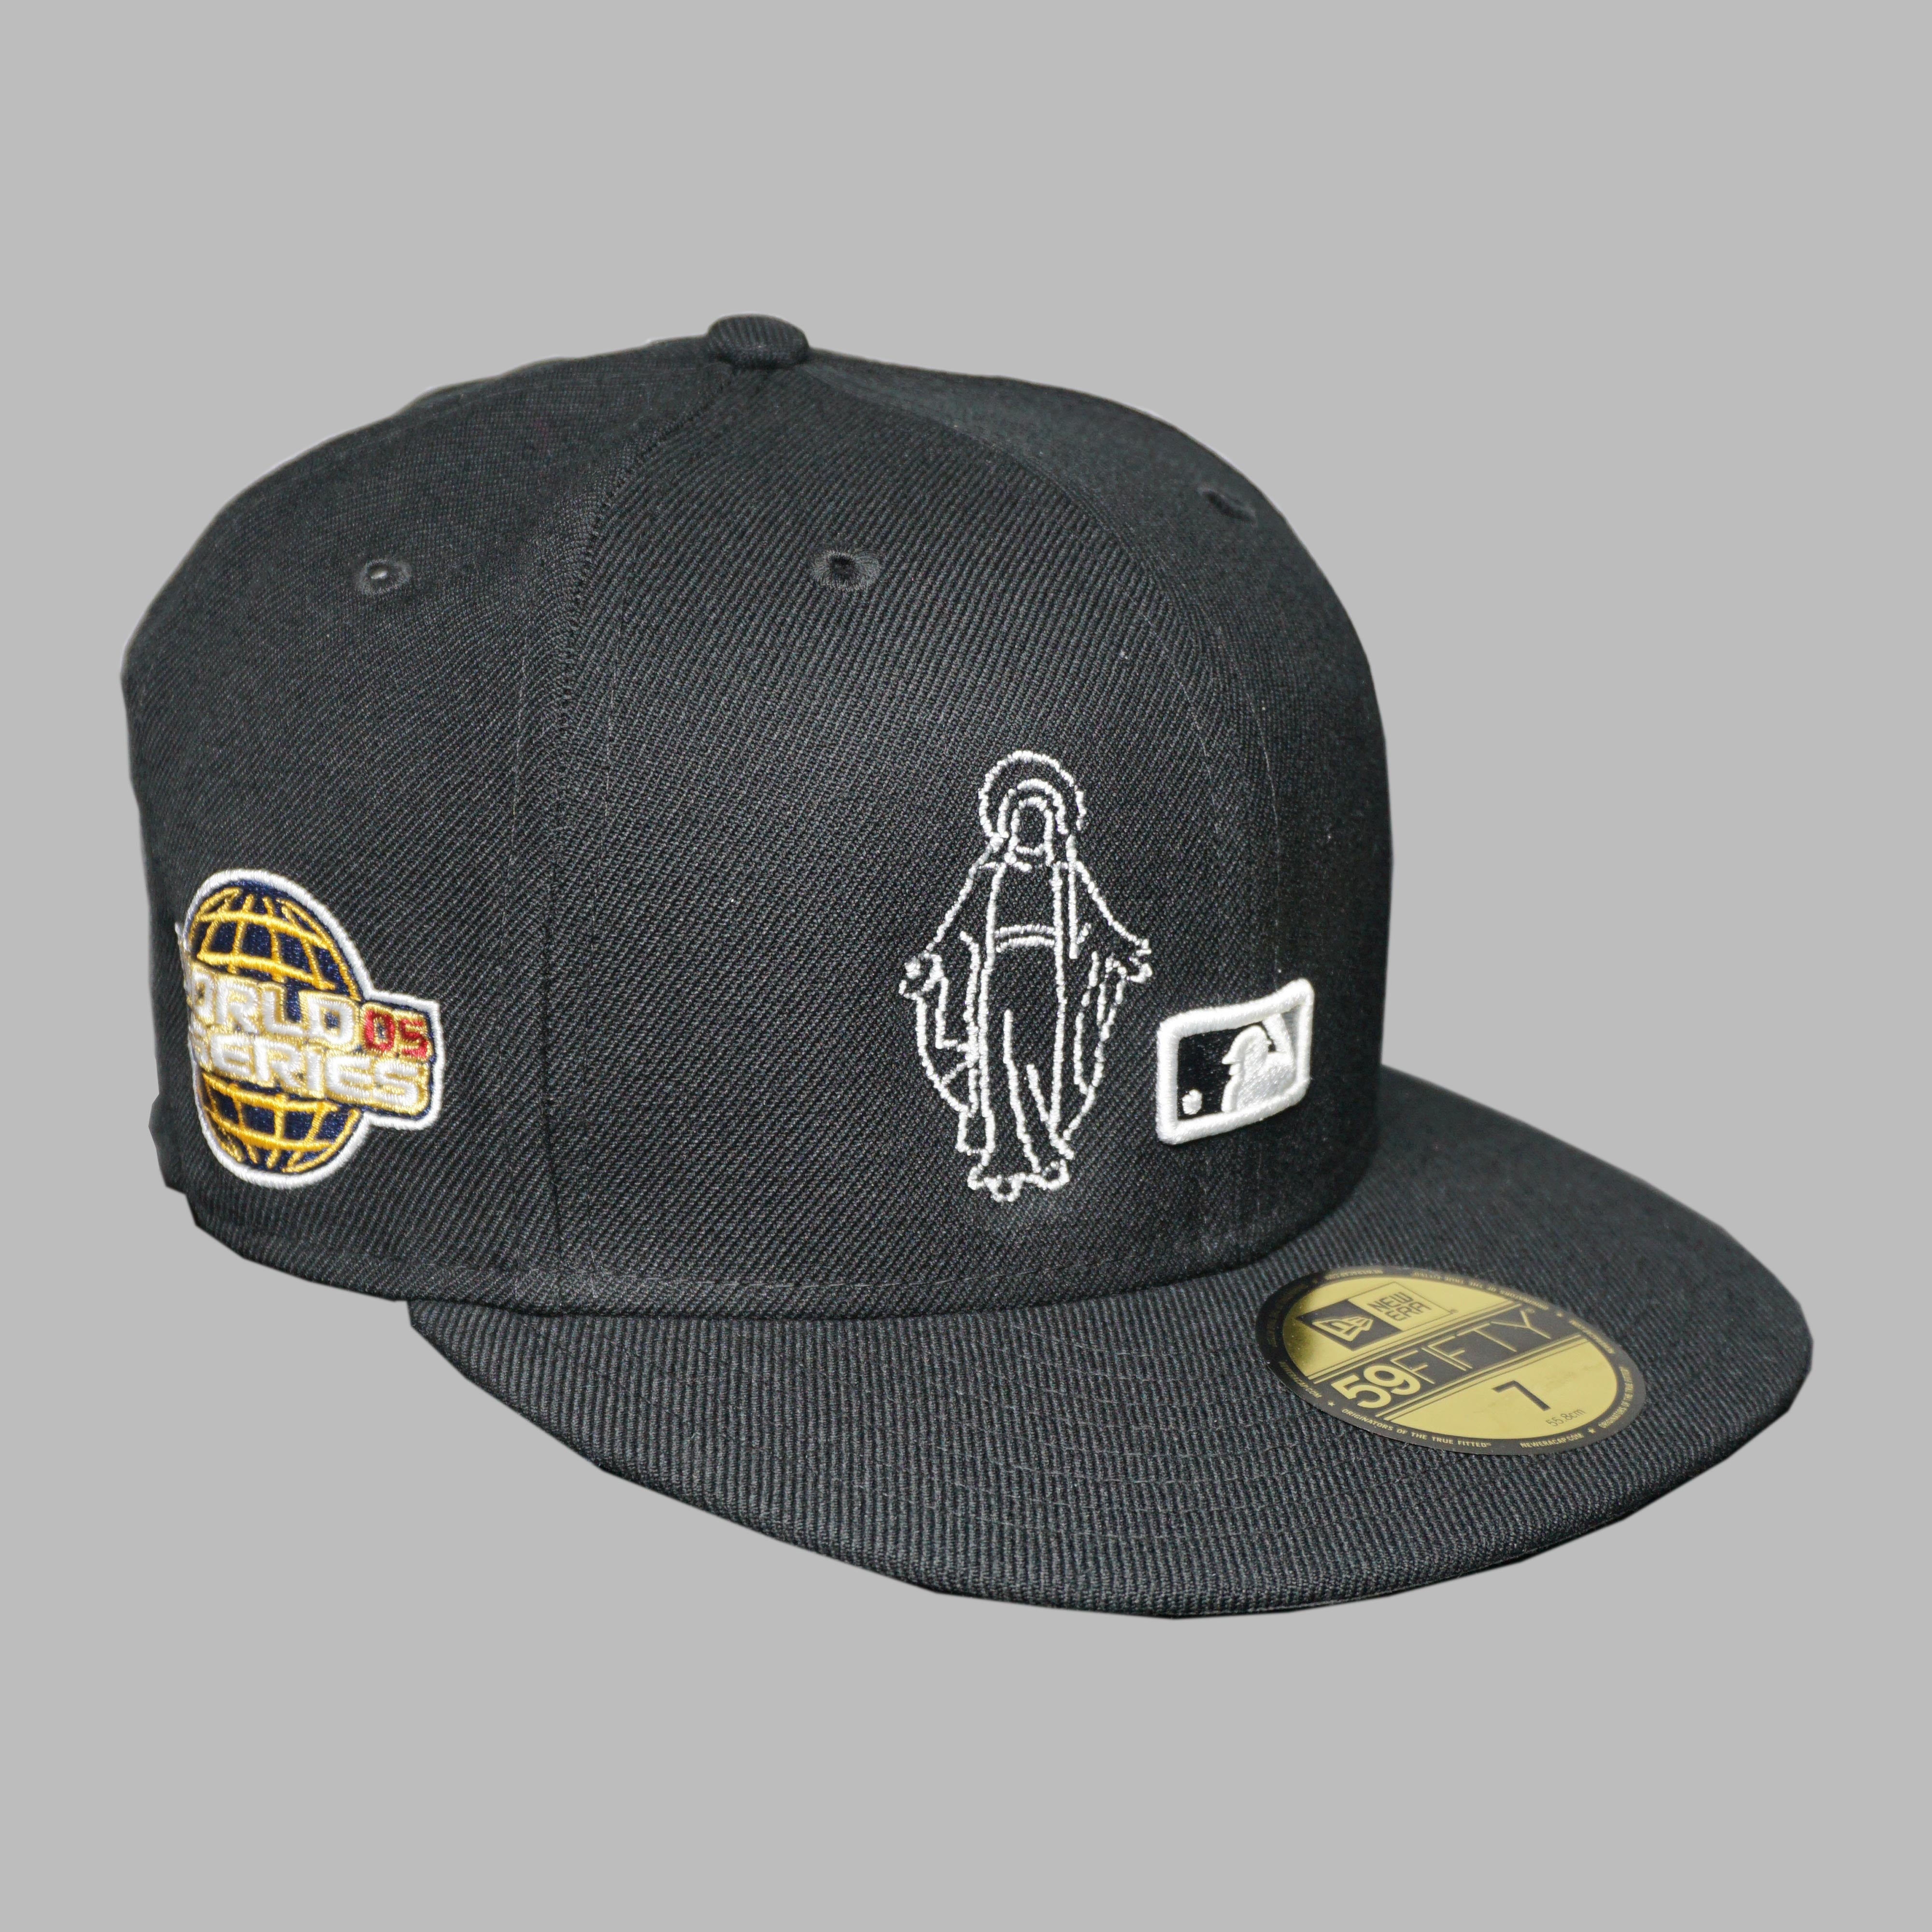 BLACK HOLY FITTED (size 7 )